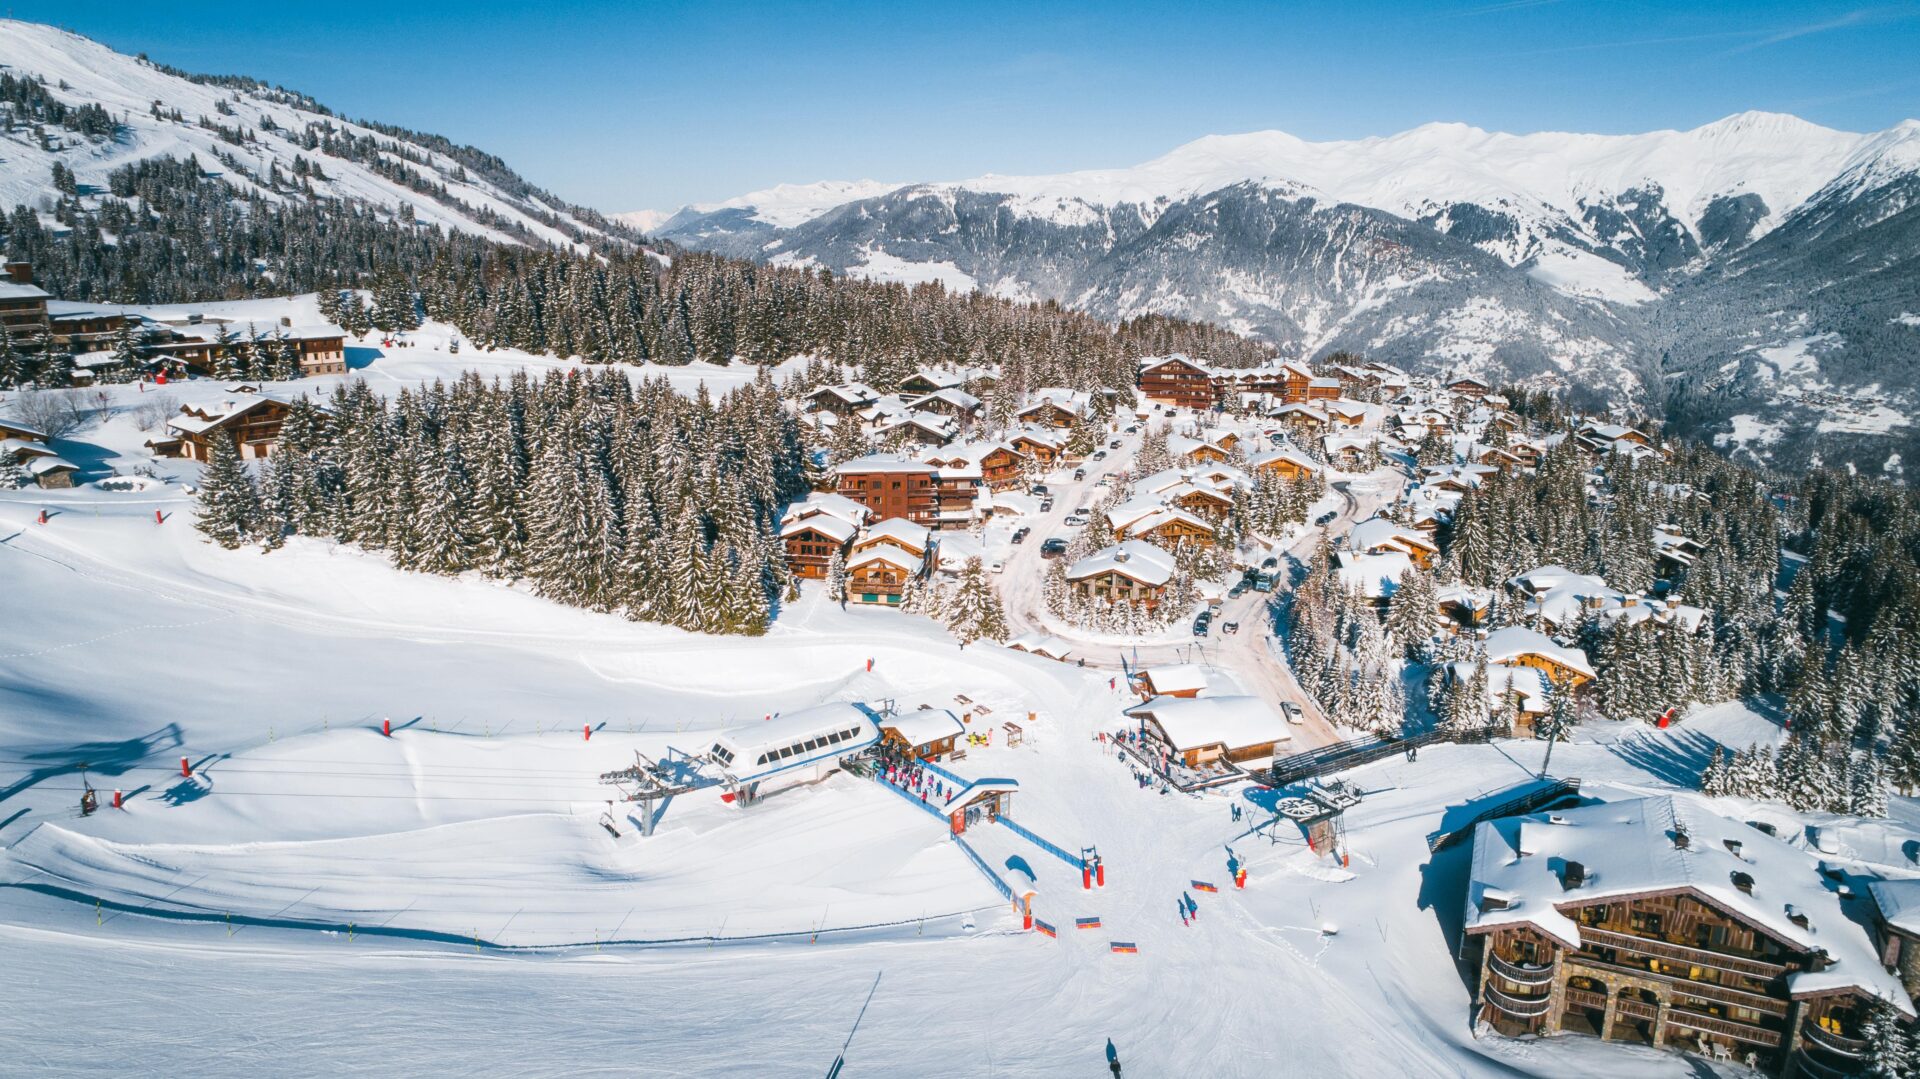 An image of Courchevel from the pistes